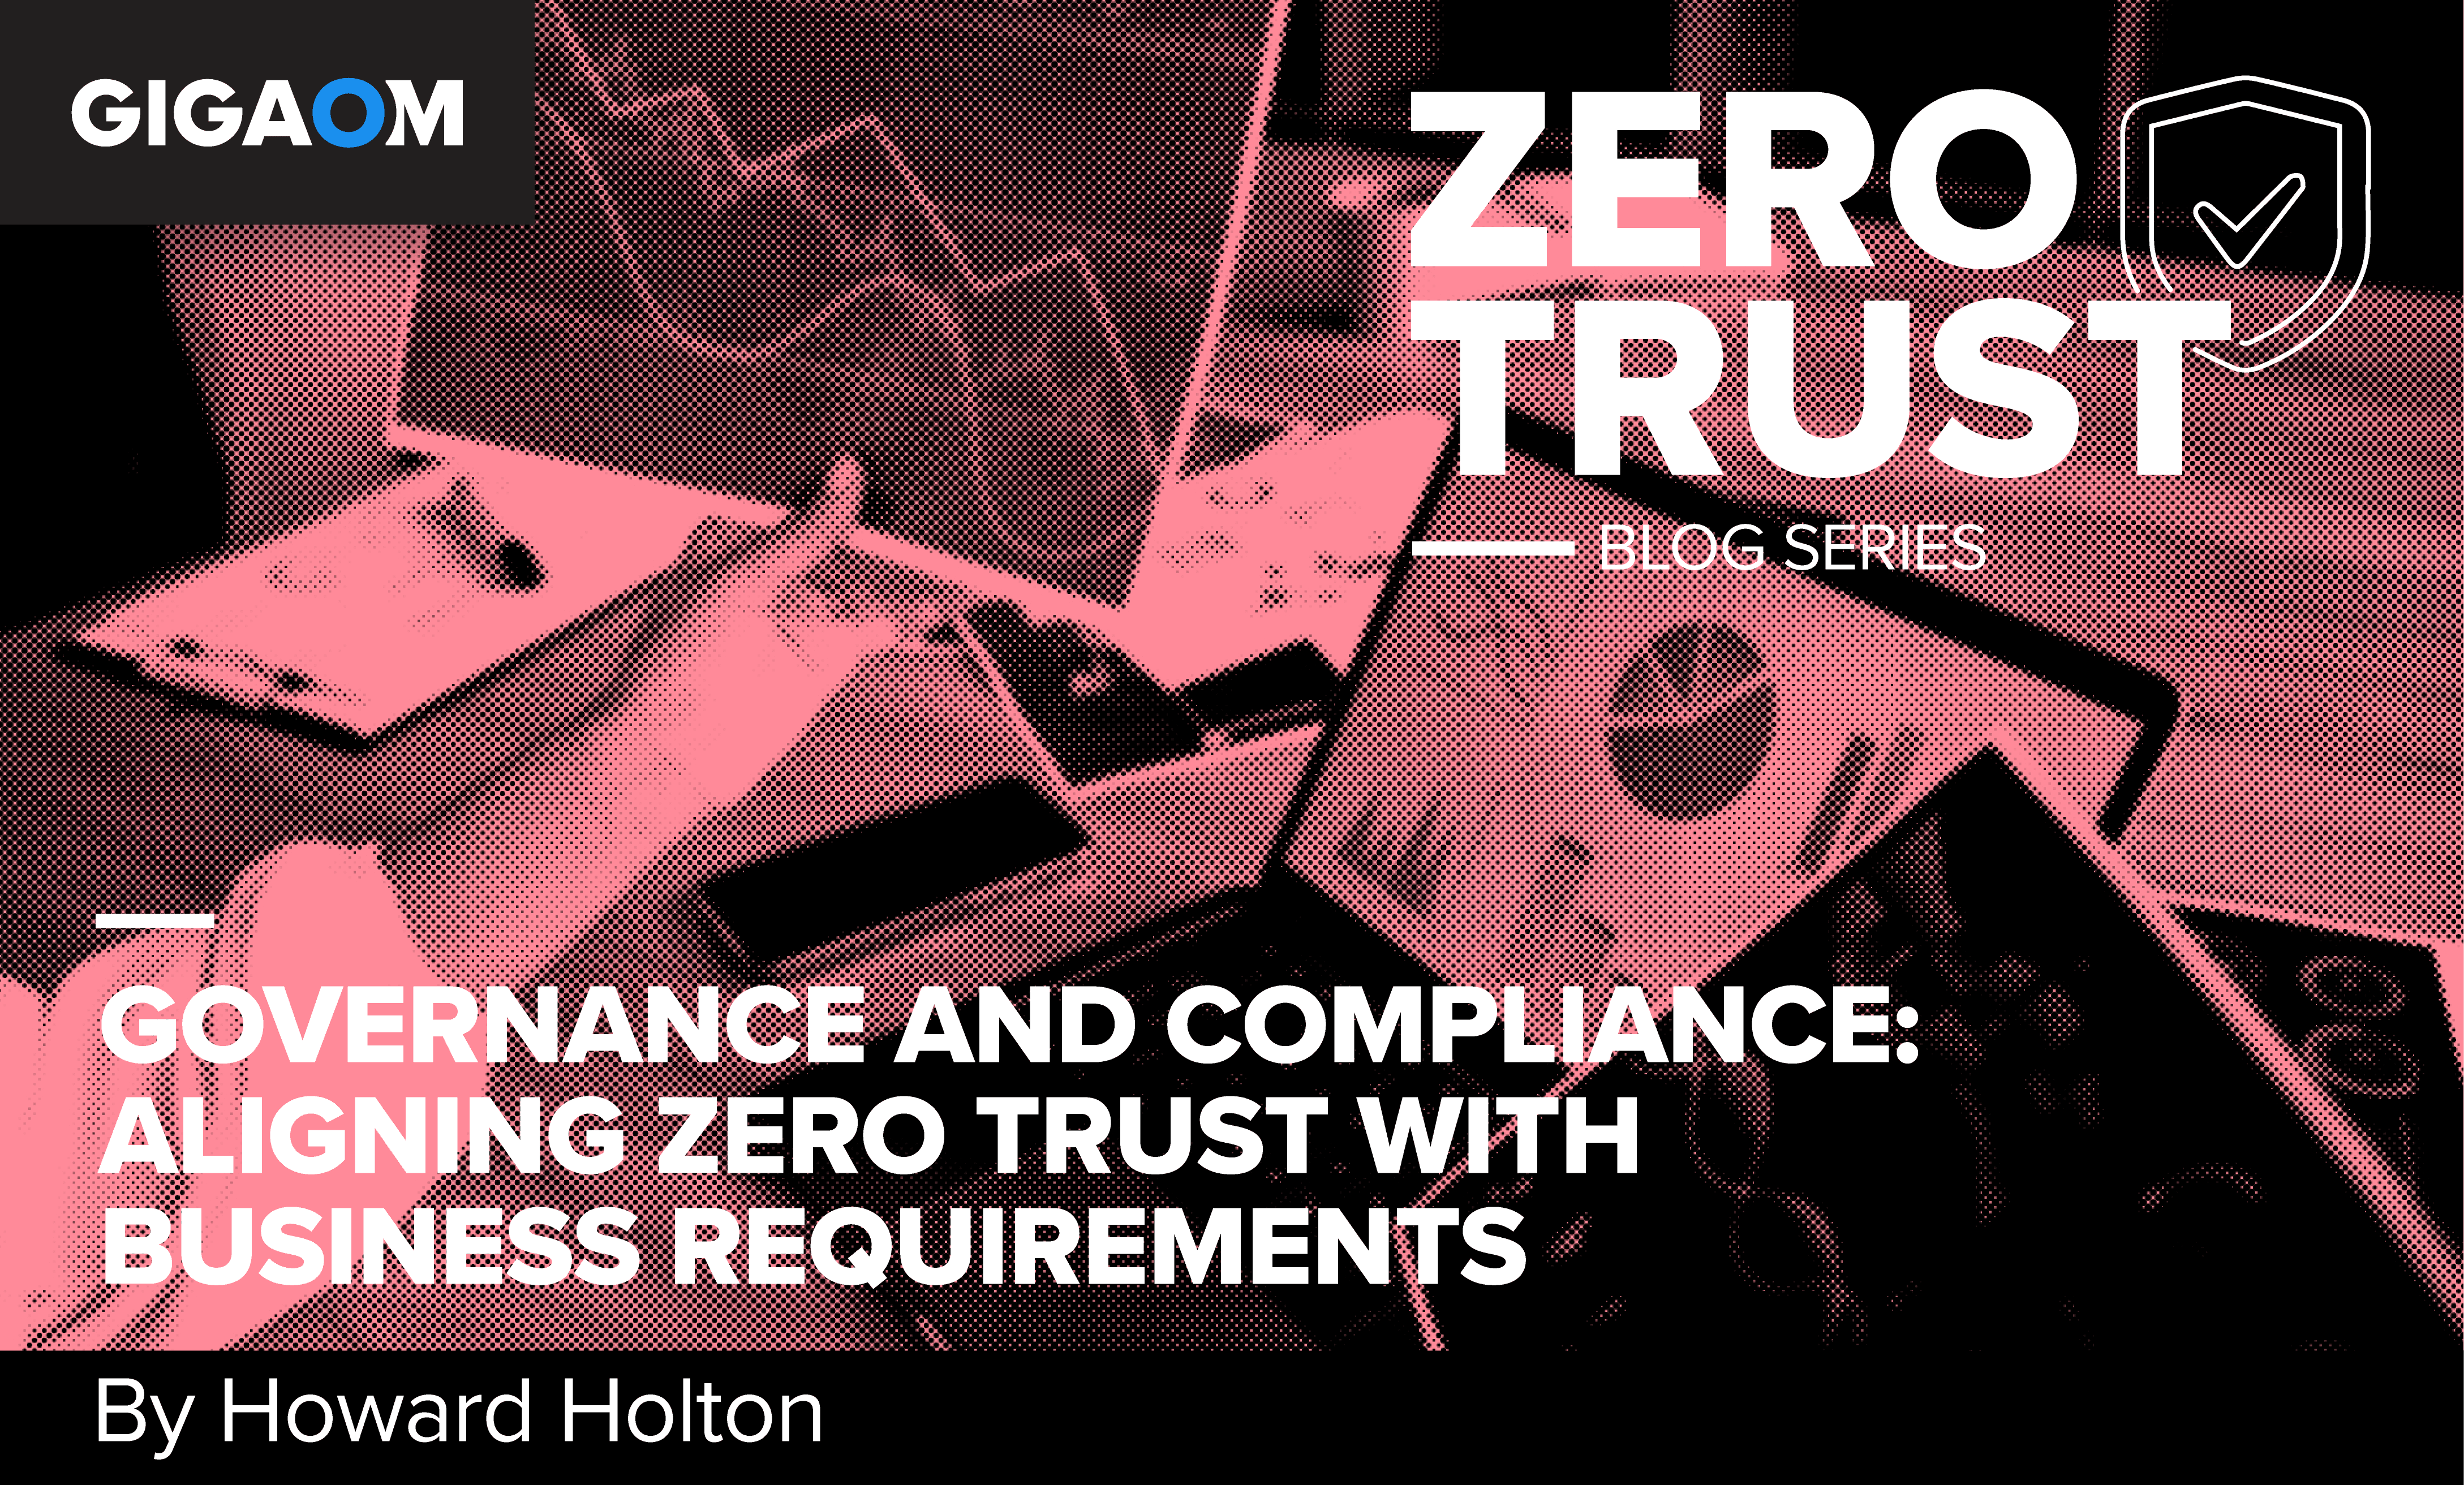 Governance and Compliance: Aligning Zero Trust with Business Requirements